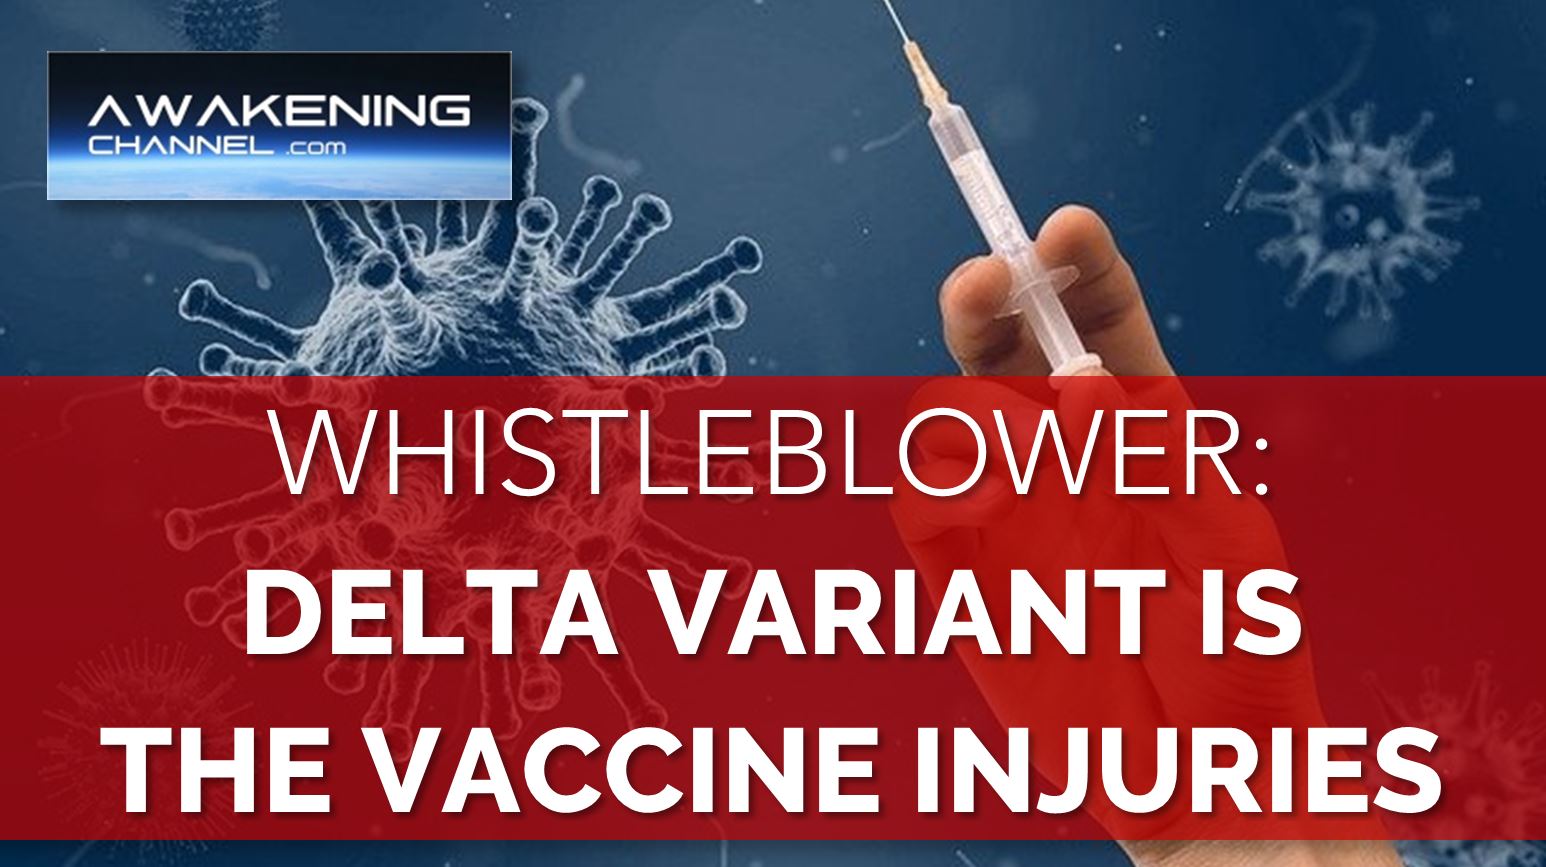 WHISTLEBLOWER: Delta Variant is the Vaccine Injuries!